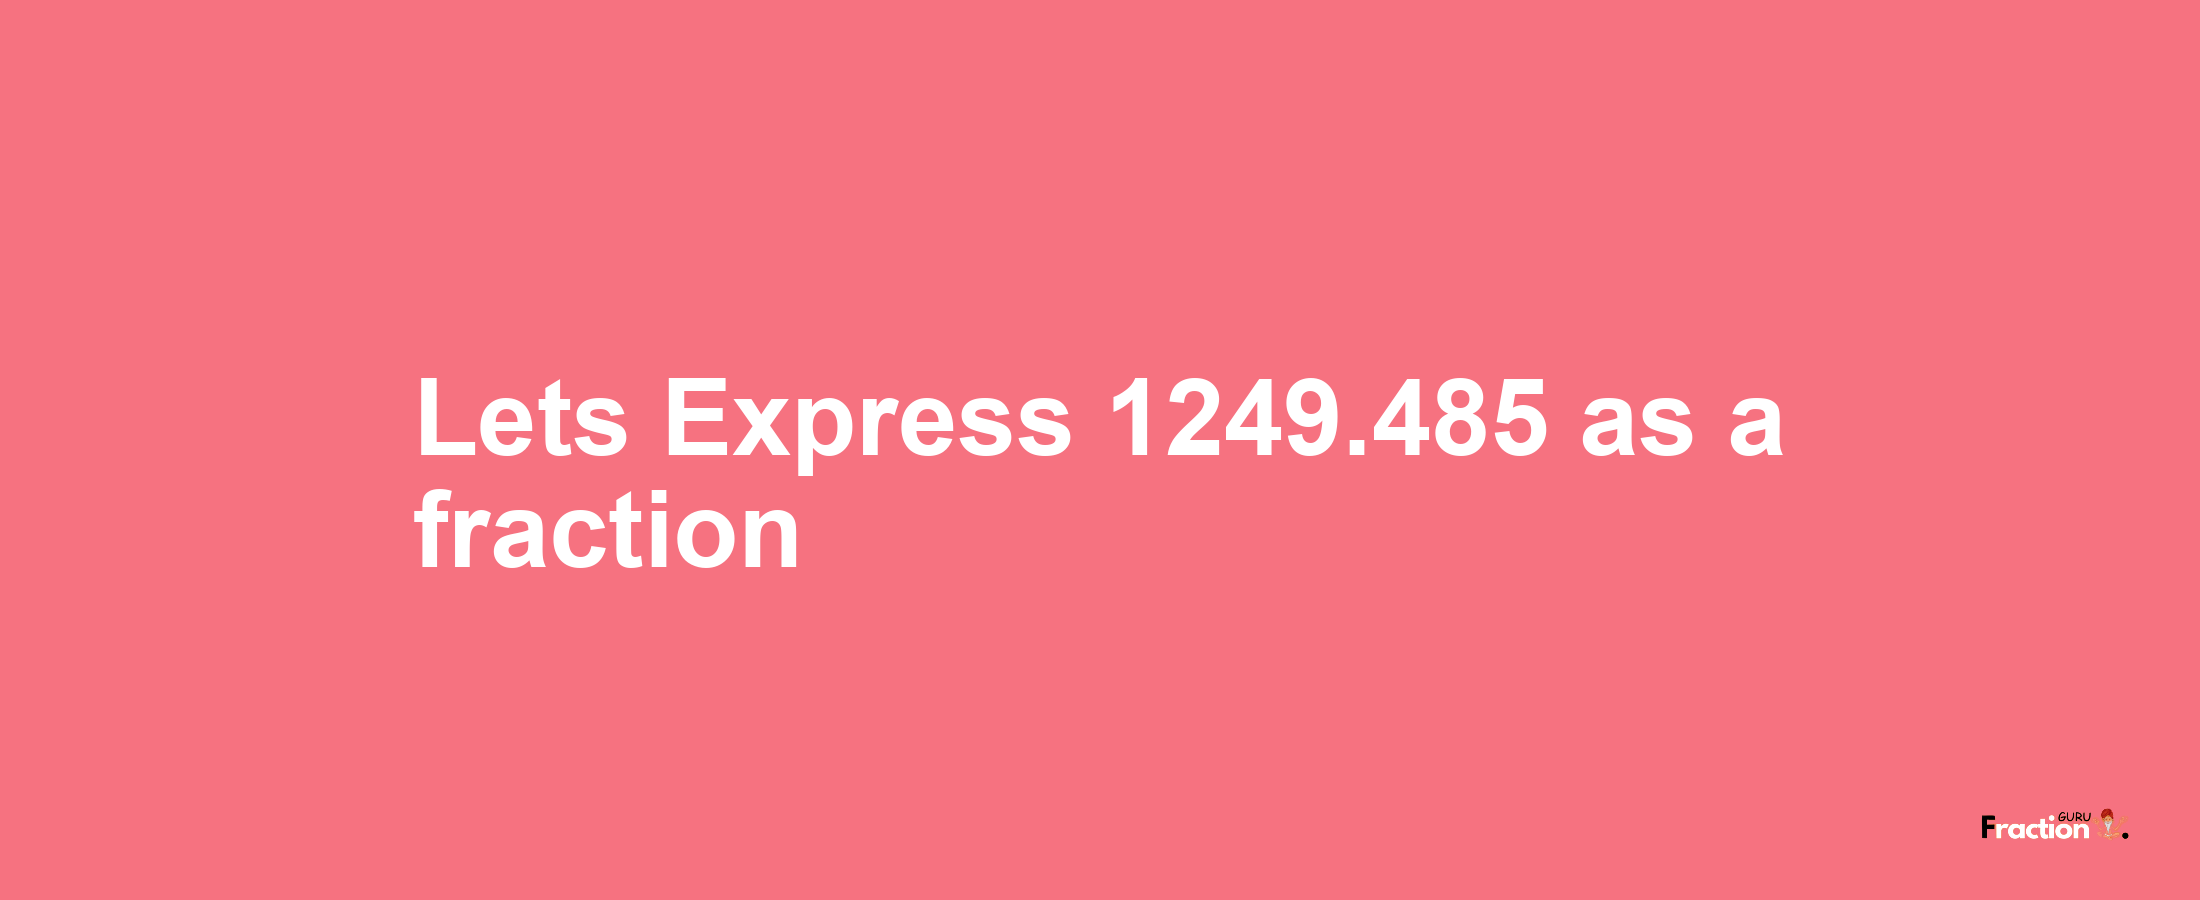 Lets Express 1249.485 as afraction